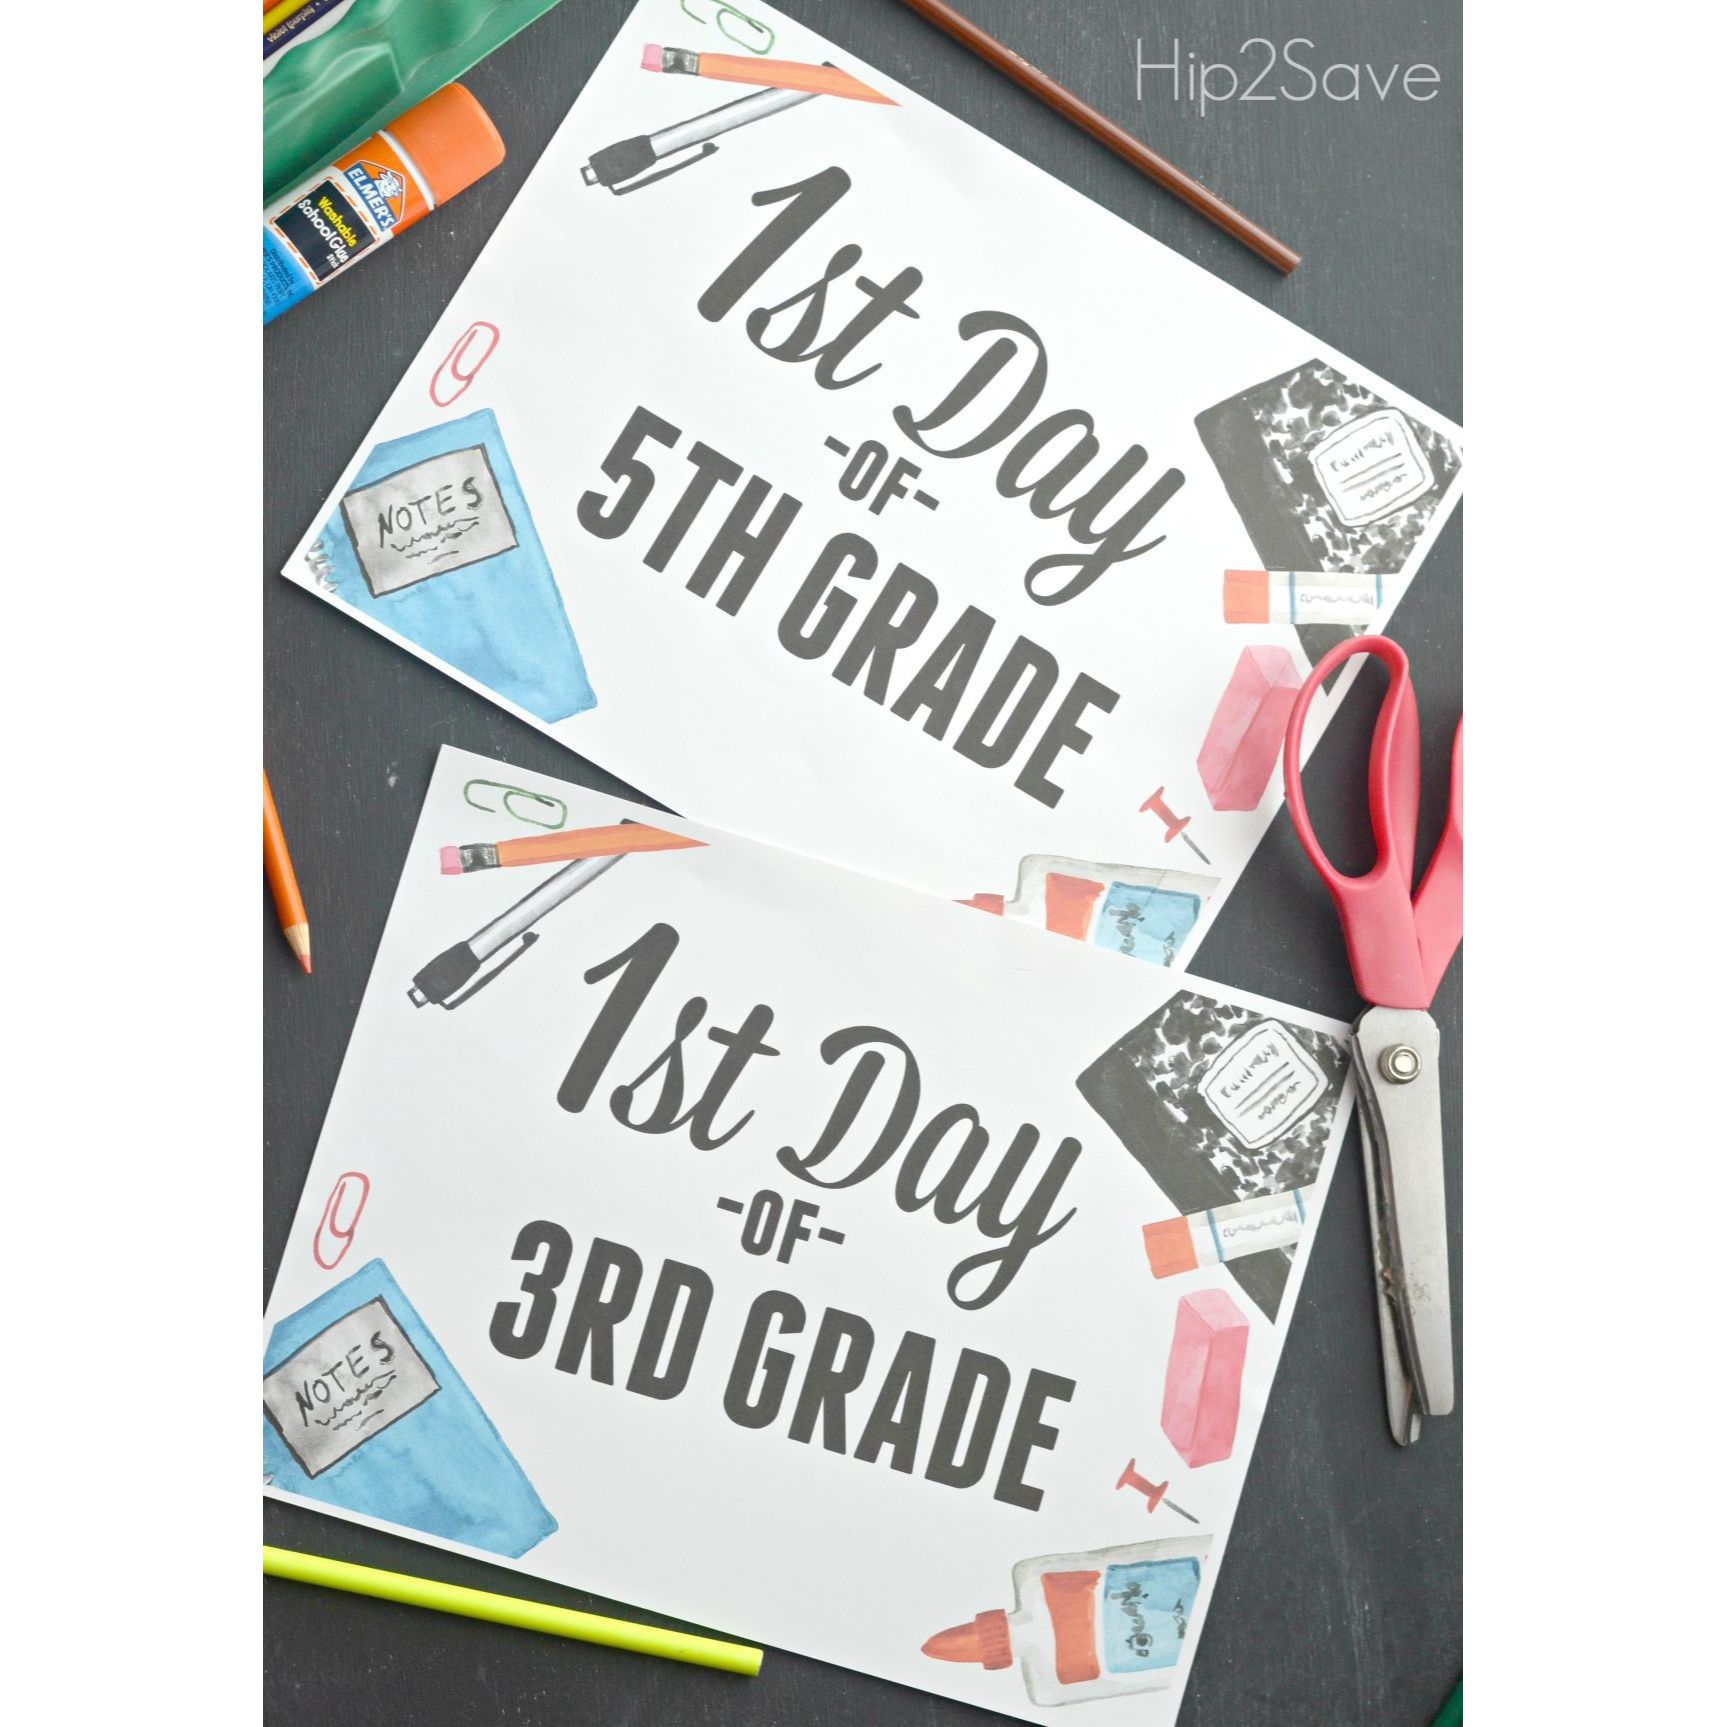 free-printable-first-day-of-school-signs